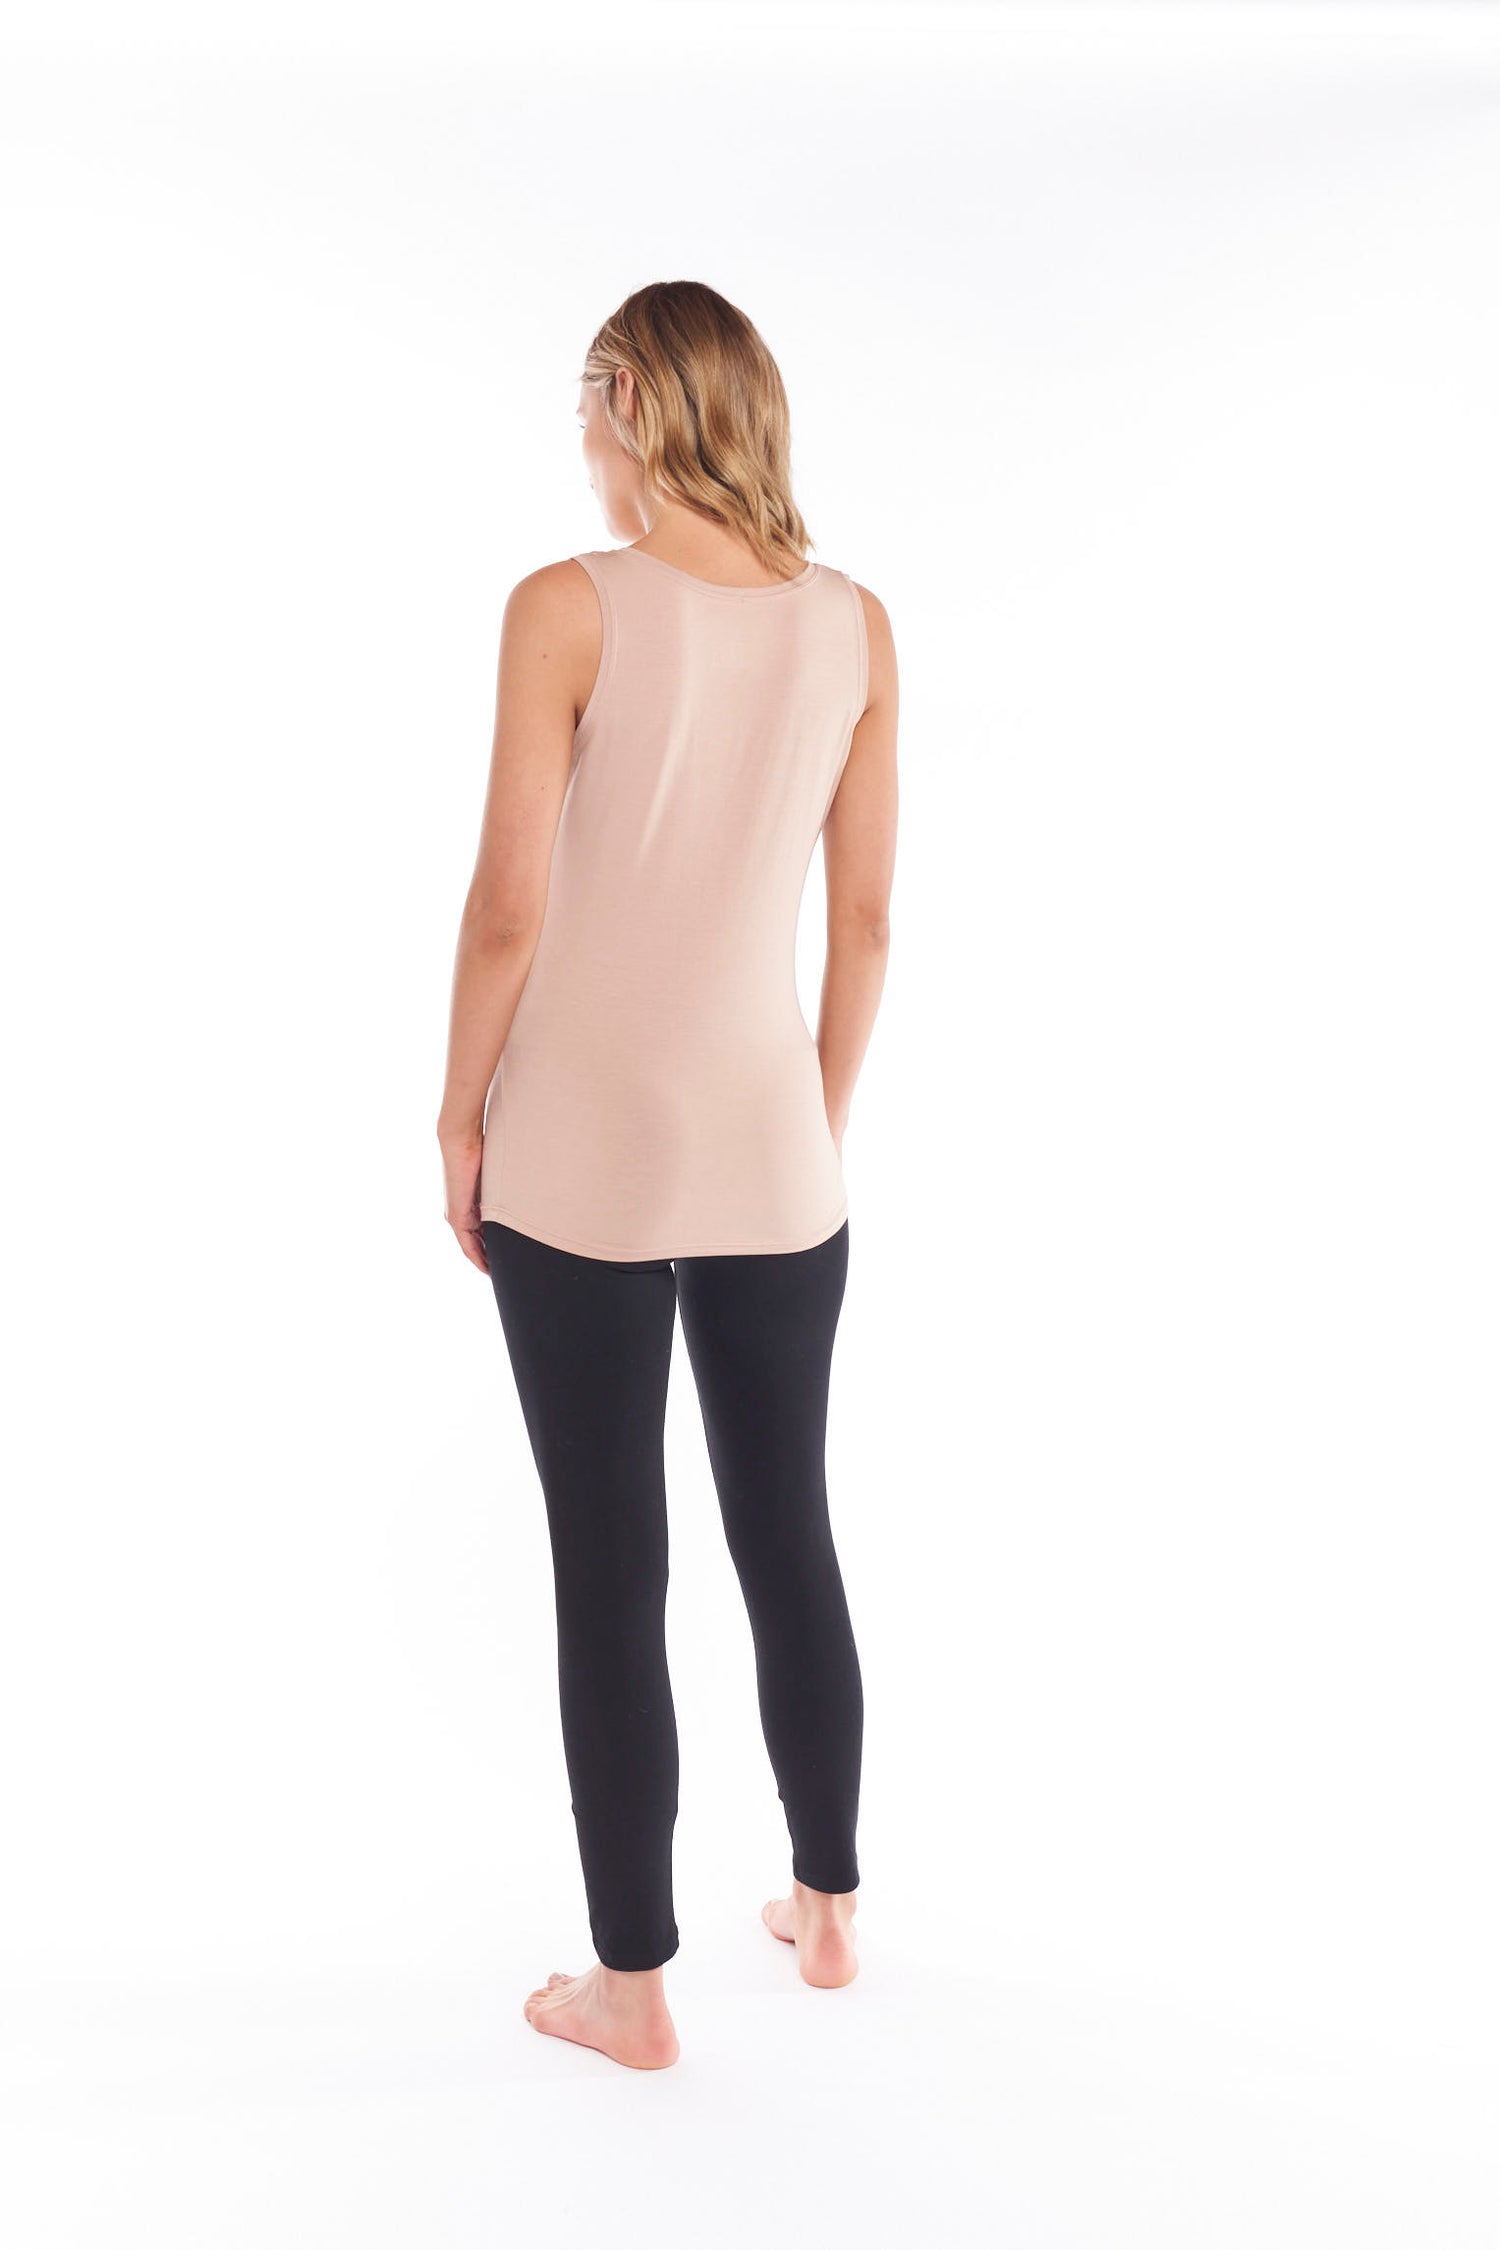 Liza is the soft feel nude tank and the perfect building block to your essential wardrobe that you&